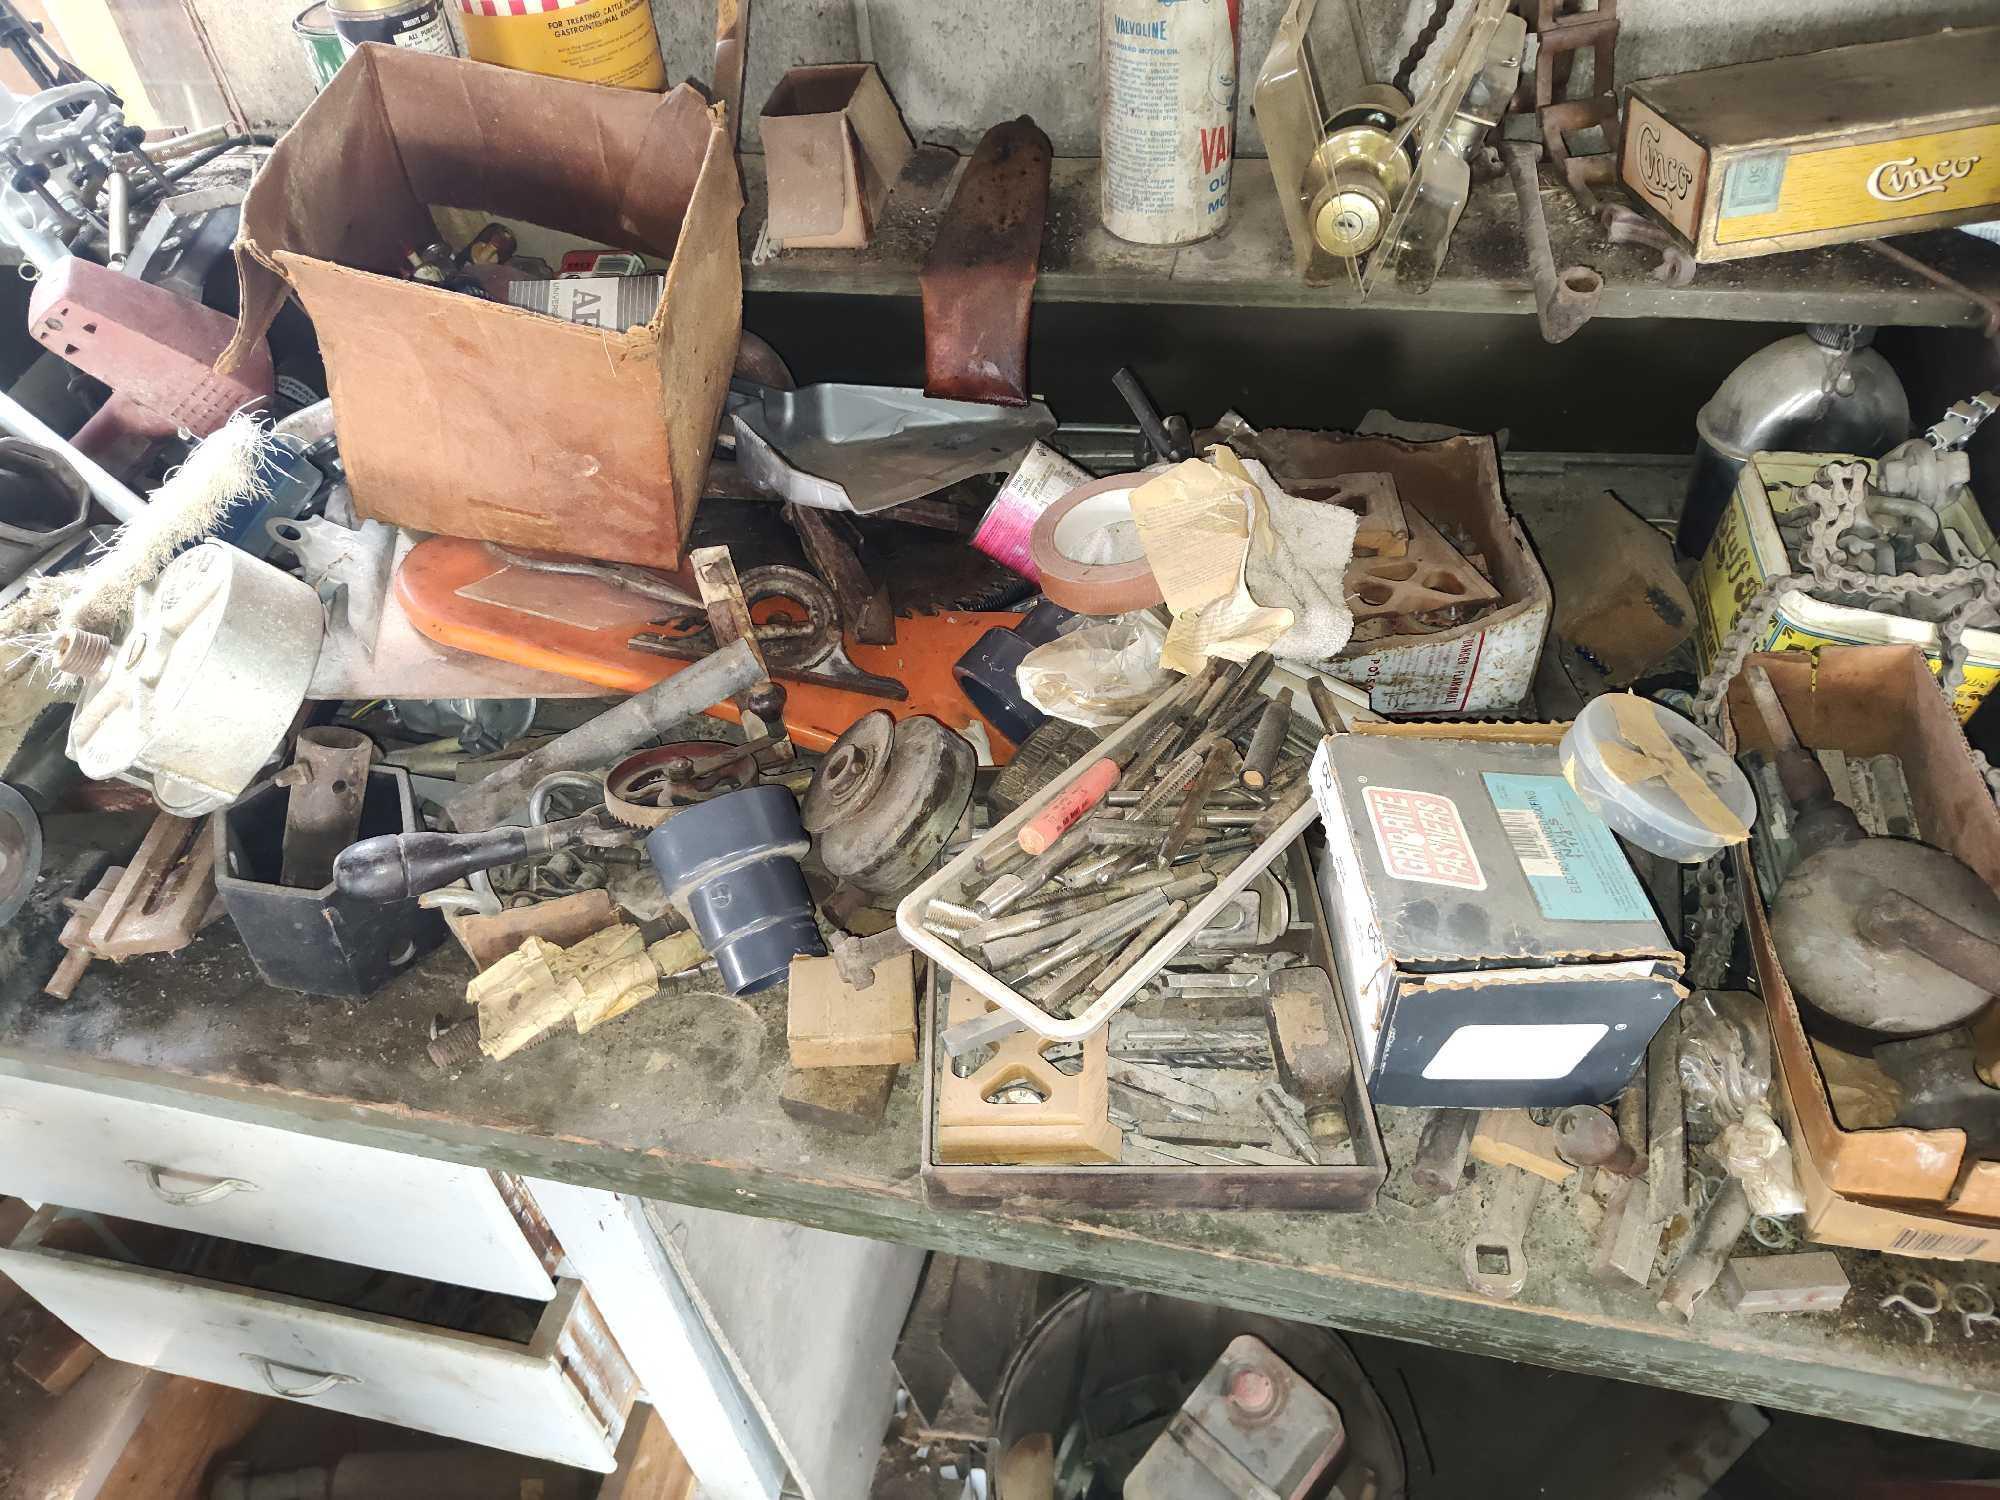 Contents of Workbench, Drill, Hardware, Oil Cans,